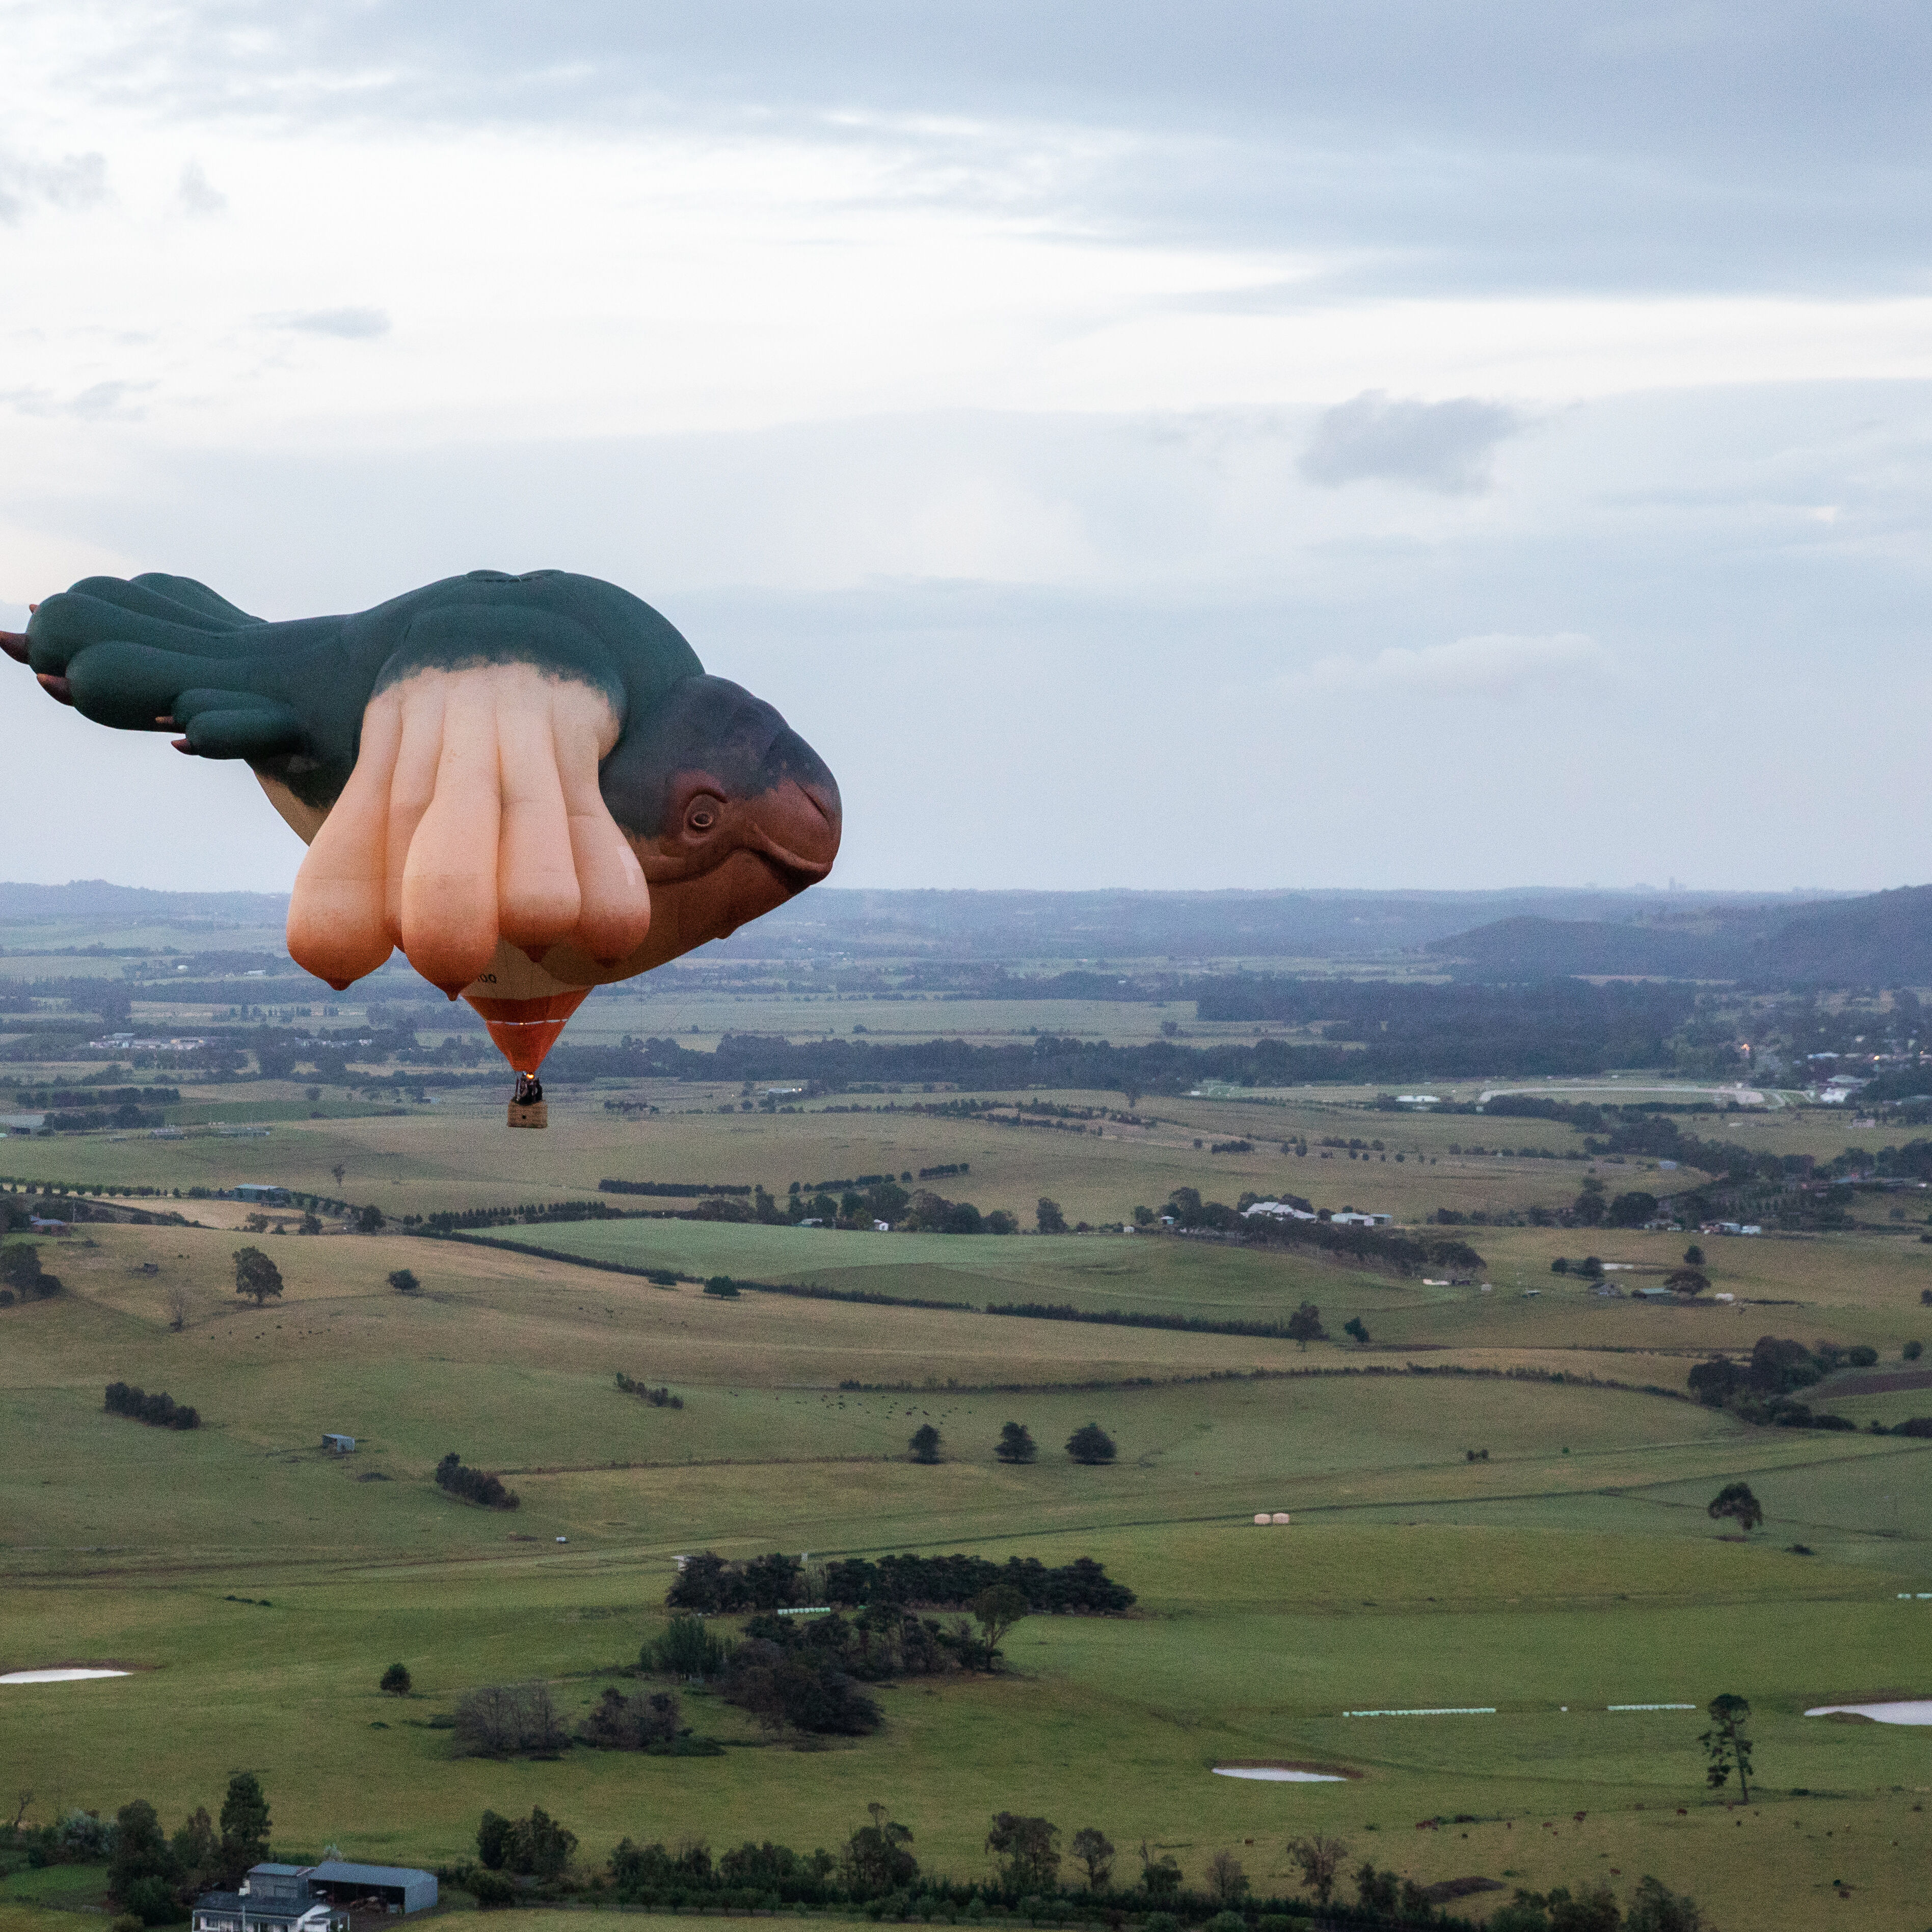 Patricia Piccinini’s Skywhale 2013 flying across the Yarra Valley to mark the opening of Patricia Piccinini & Joy Hester: Through love... at the  TarraWarra Museum of Art, 24 November 2018 –11 March 2019. Commissioned for The Centenary of Canberra. Courtesy of the artist and the  Australian Capital Territory Government. Courtesy the artist, Tolarno Galleries, Melbourne and Roslyn Oxley9 Gallery, Sydney. Photo: Rick Liston.